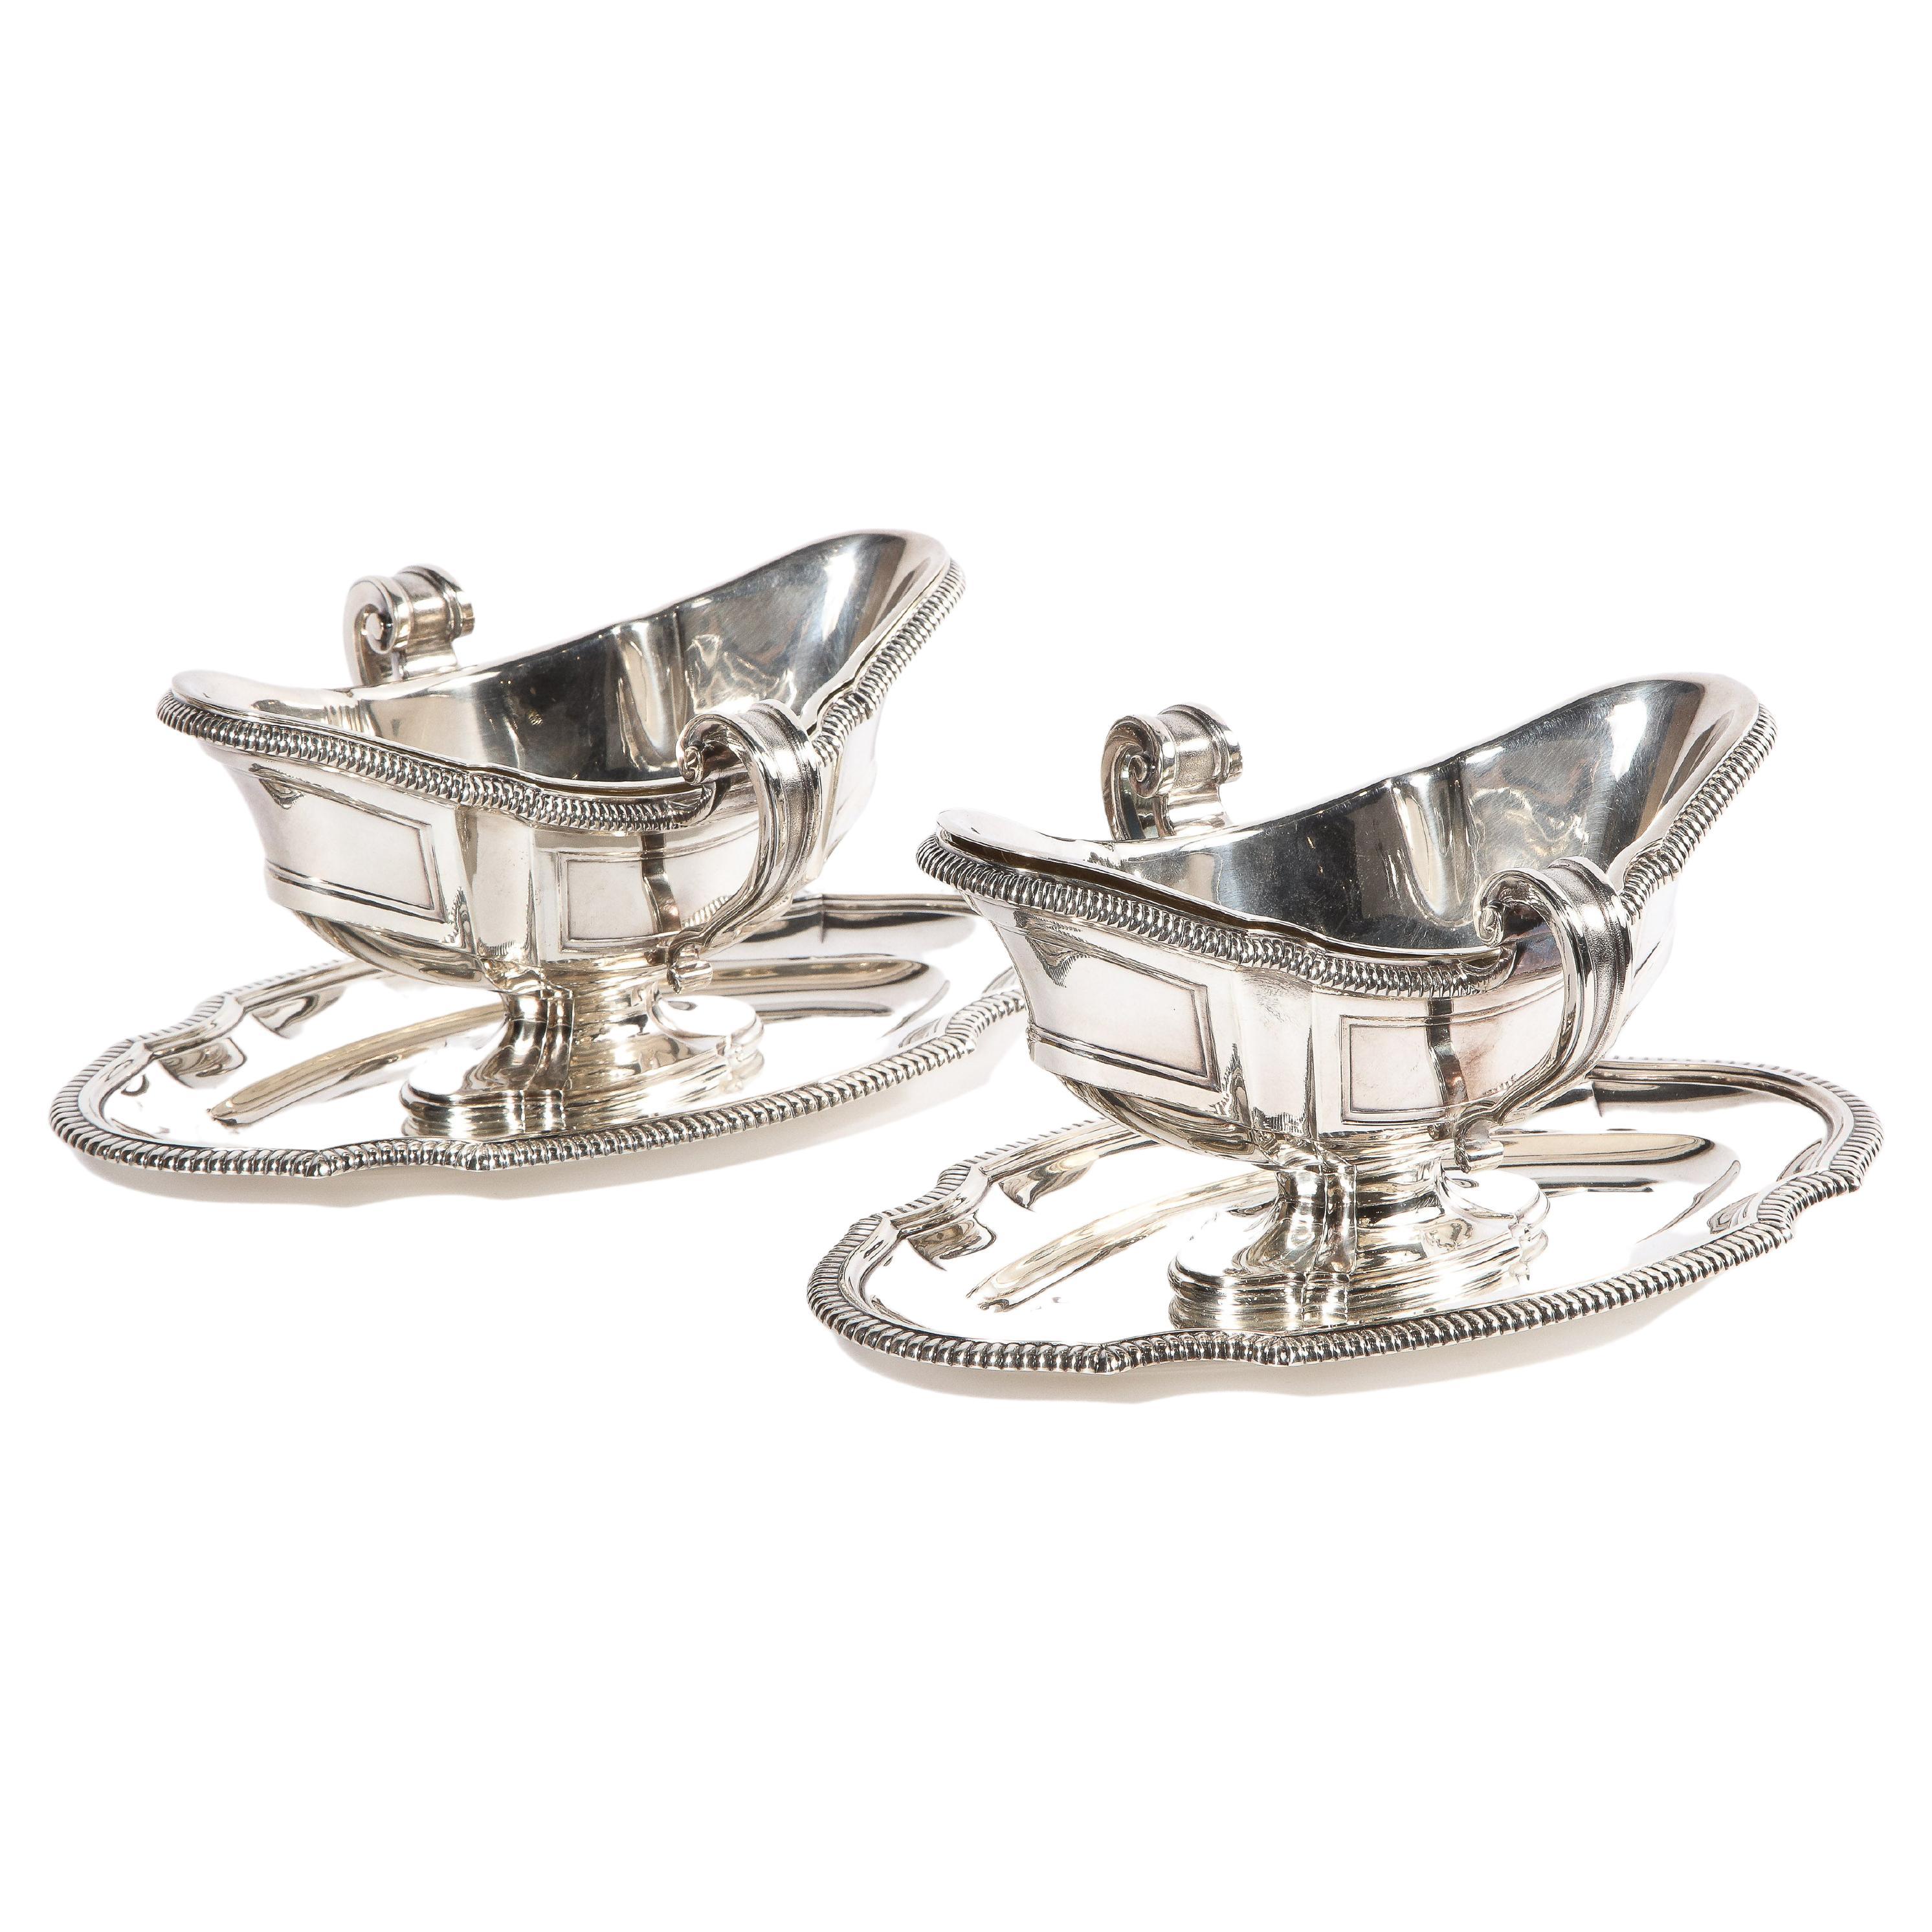 Pair of French Silver Sauceboats by Gustave Keller, Paris, circa 1880